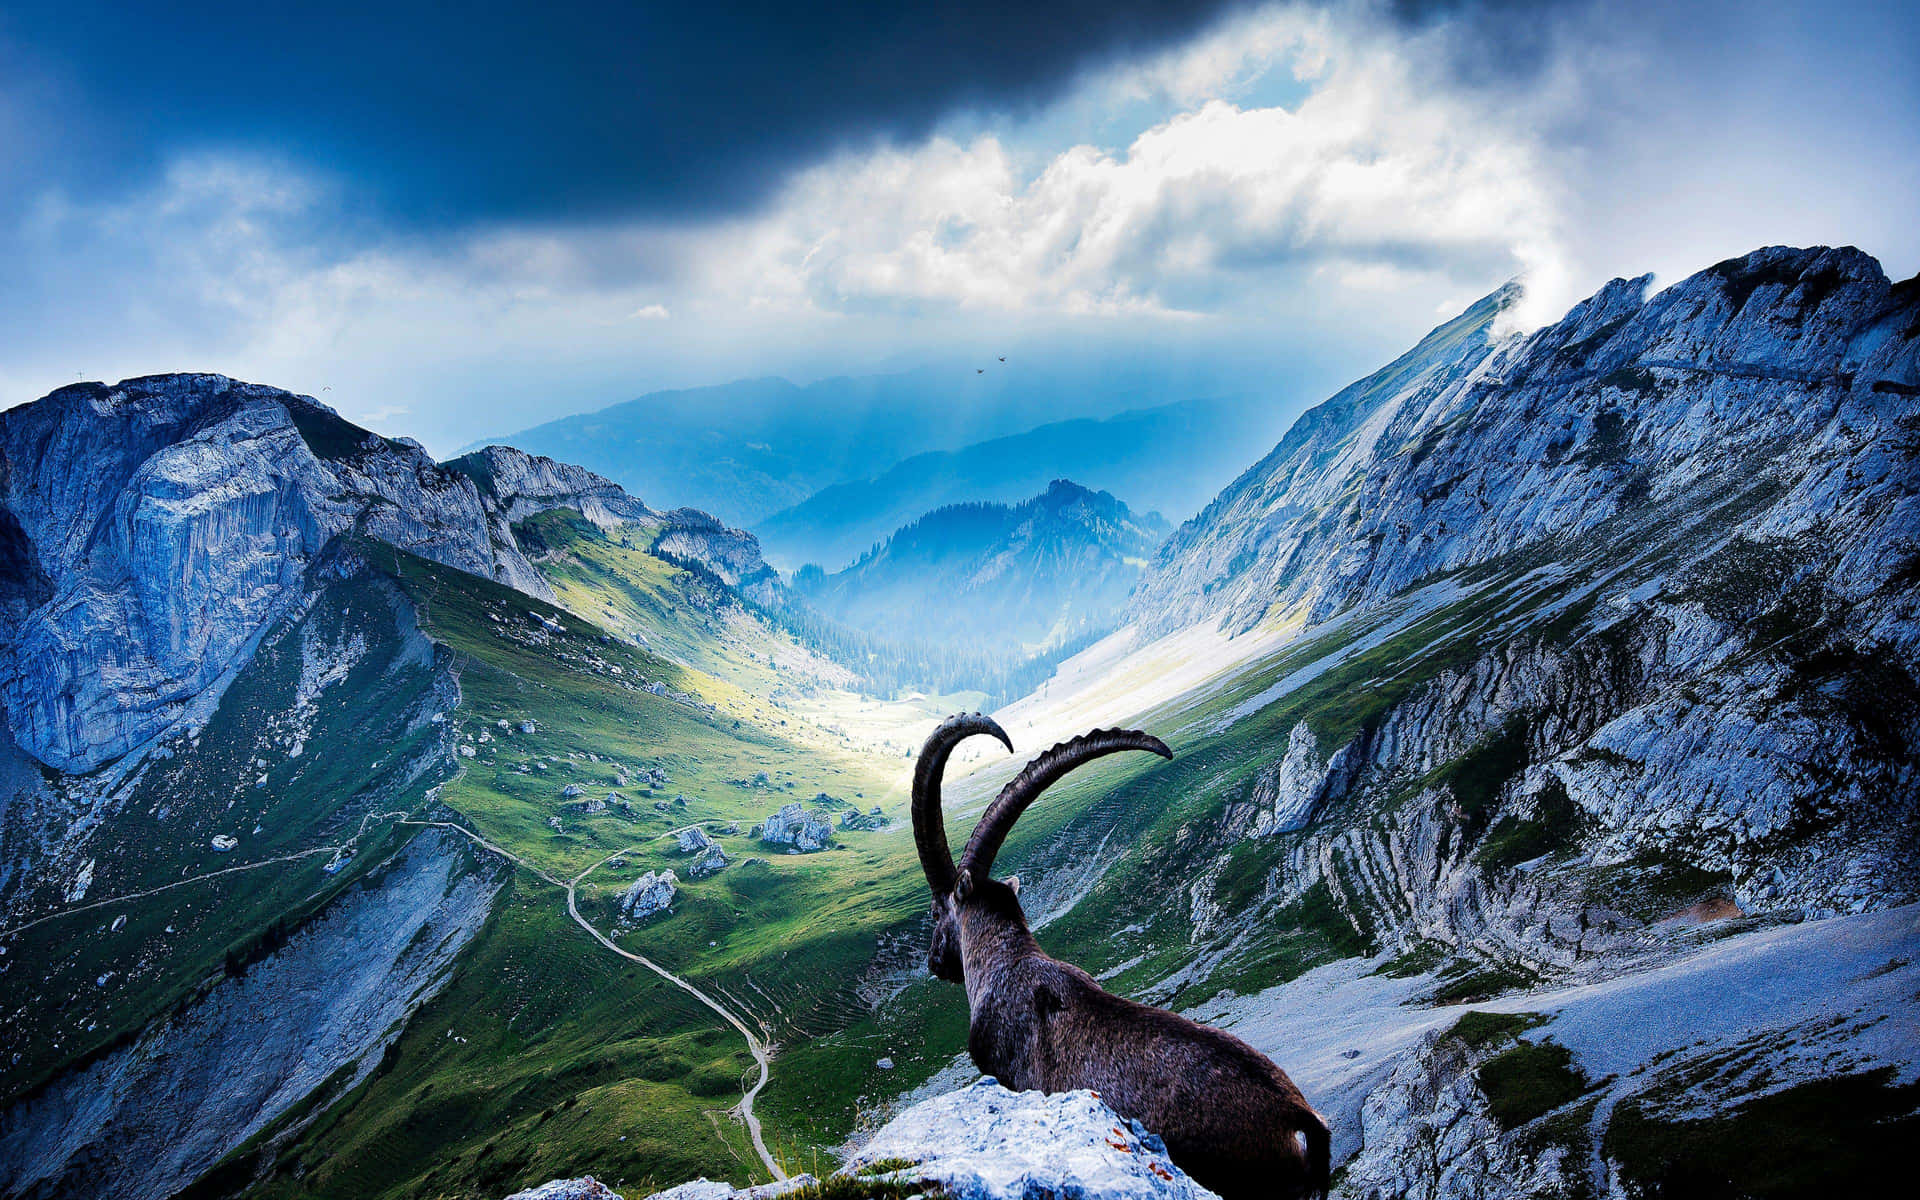 A daring mountain goat scaling a cliff face